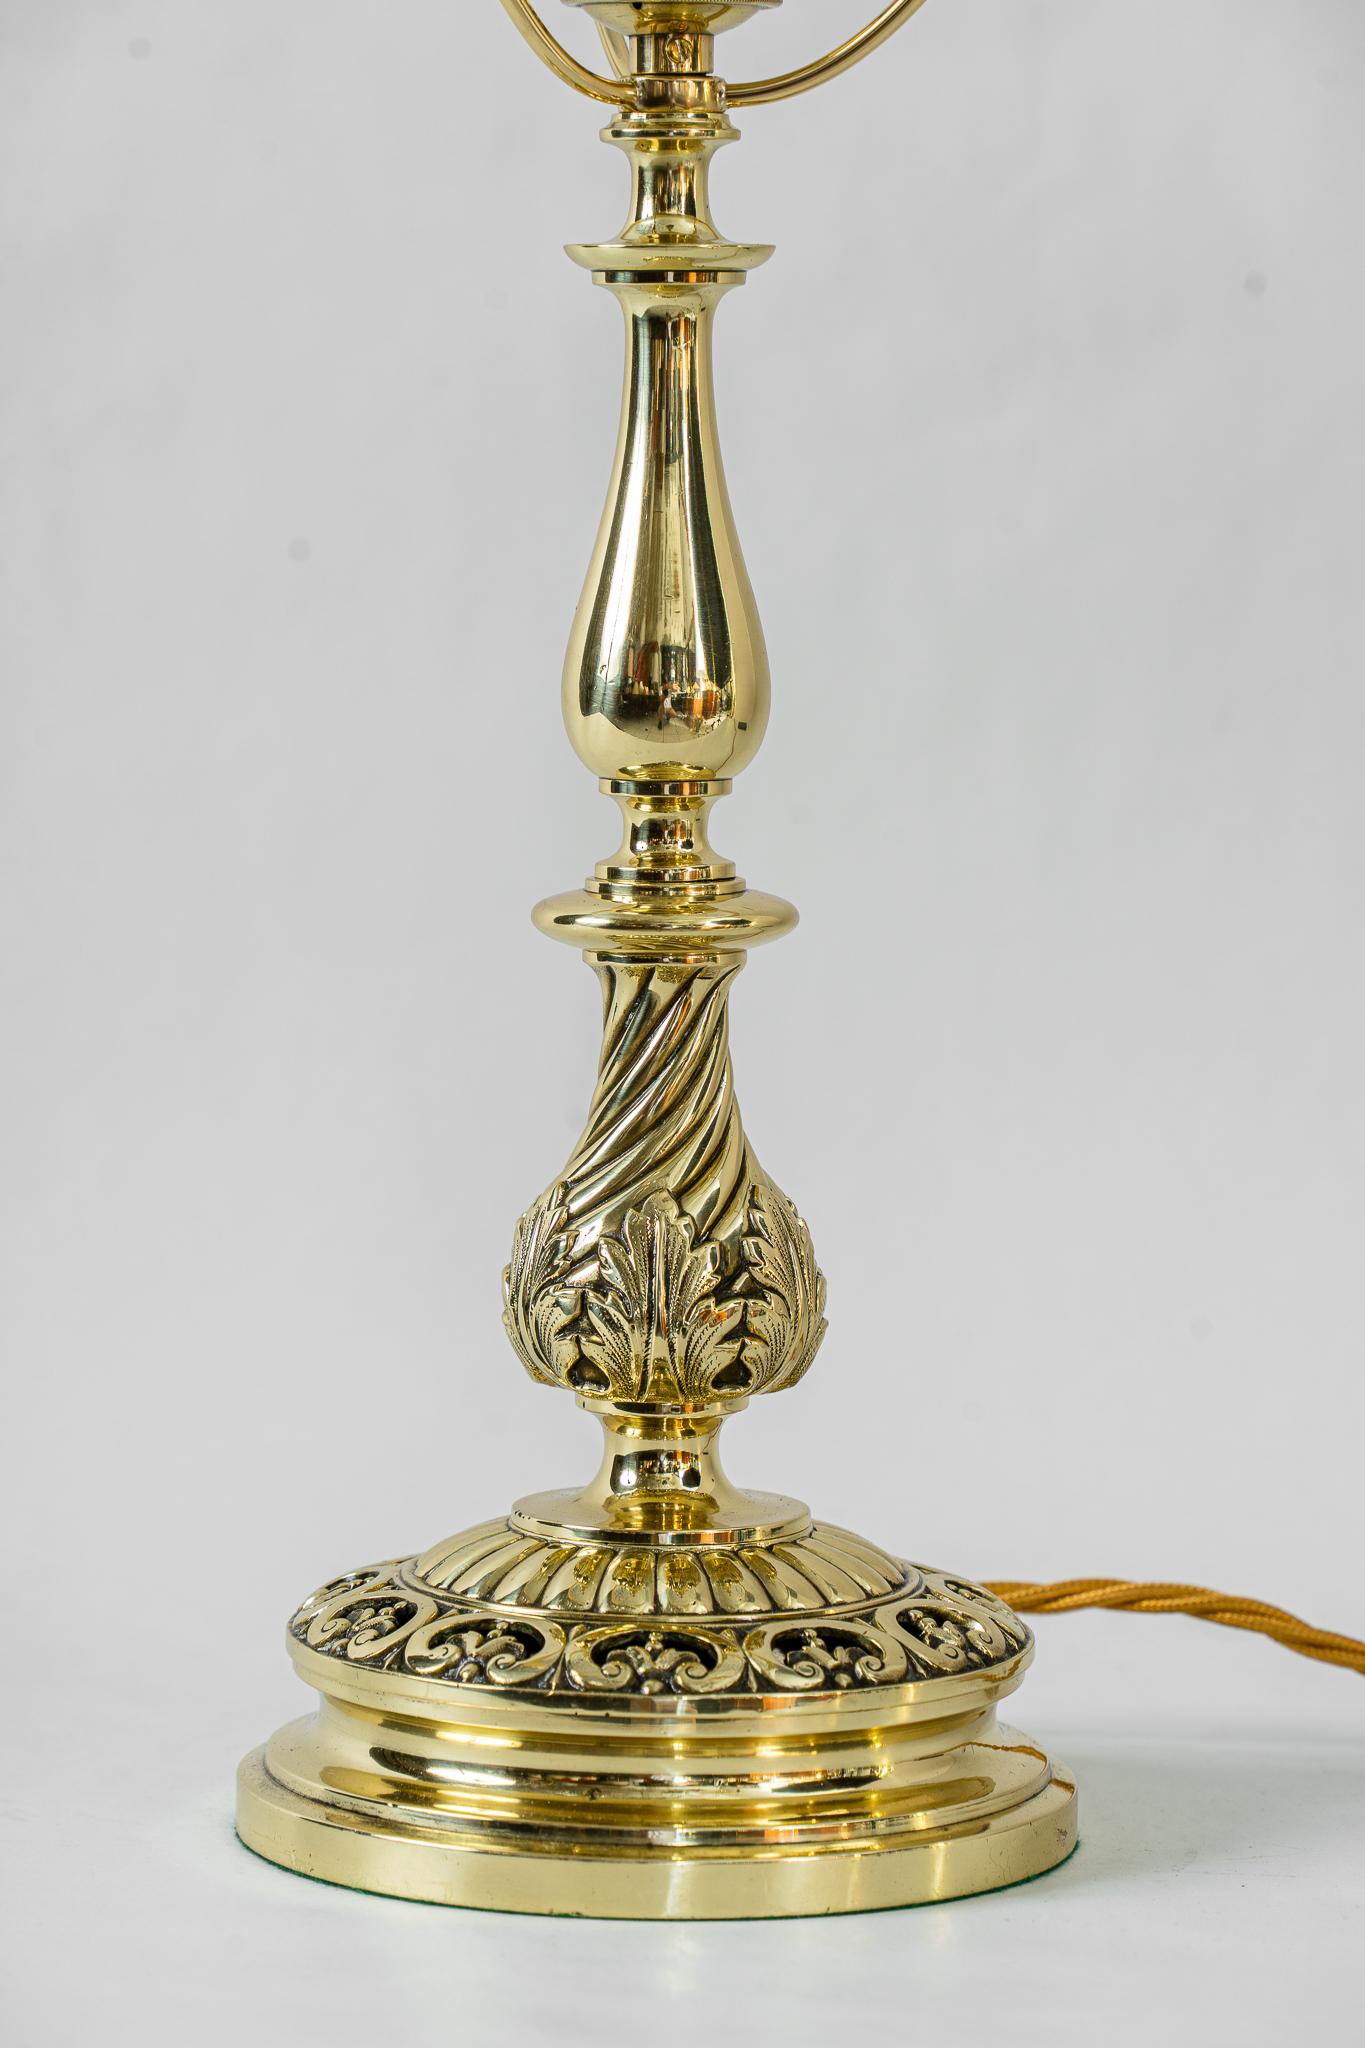 Historistic table lamp with cut glass shade around 1890s
Polished and stove enameled
Original glass shade